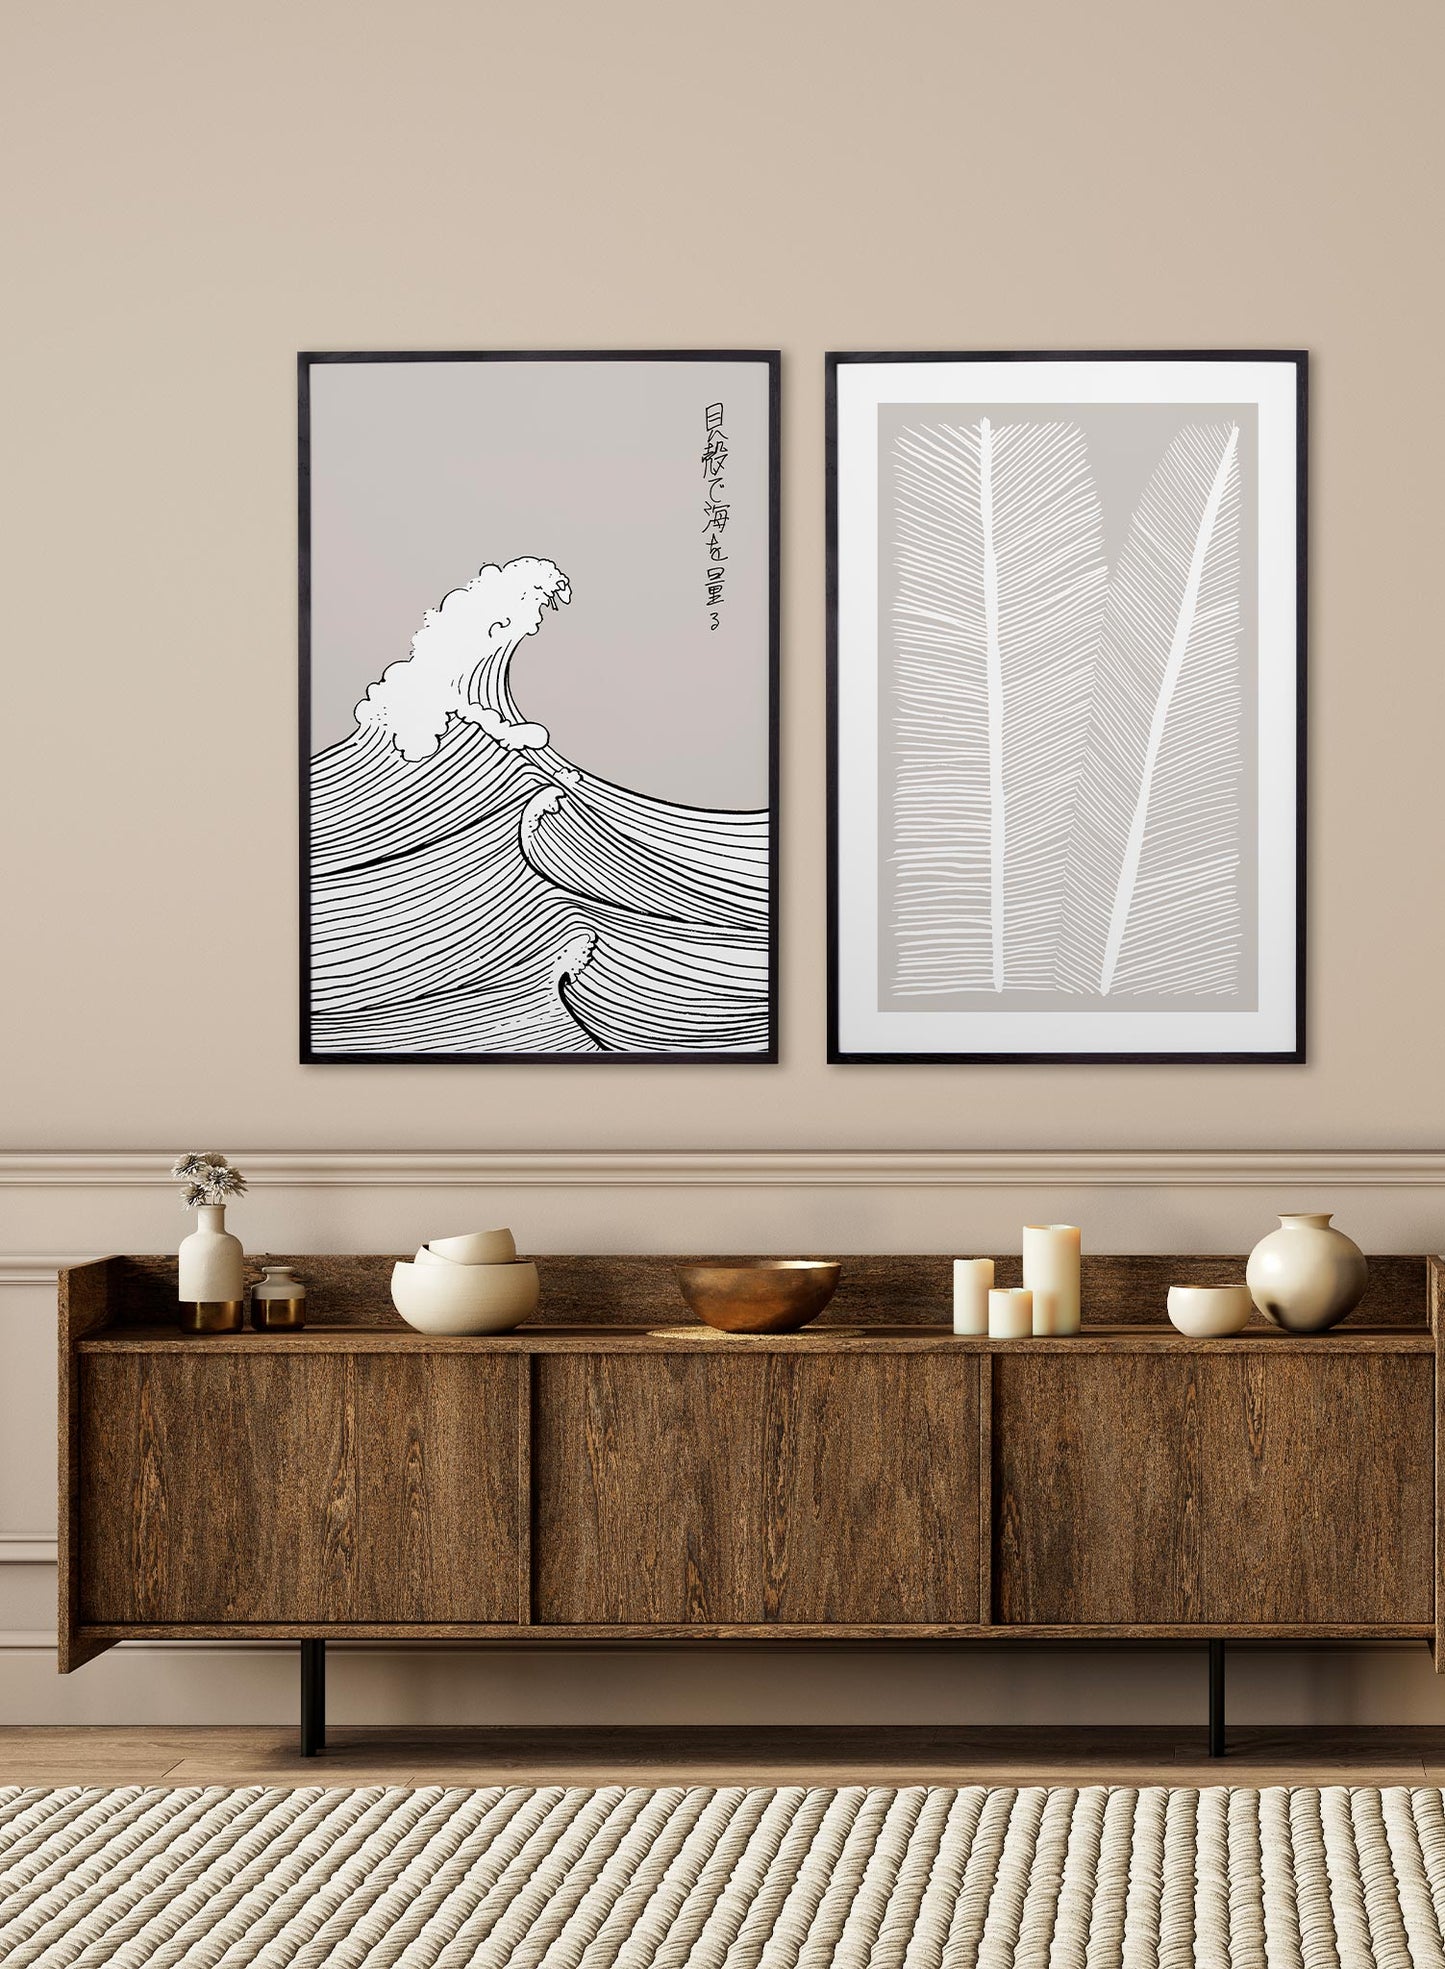 Kanagawa, Simplified is a minimalist illustration by Opposite Wall of a hand drawn tall crashing wave.